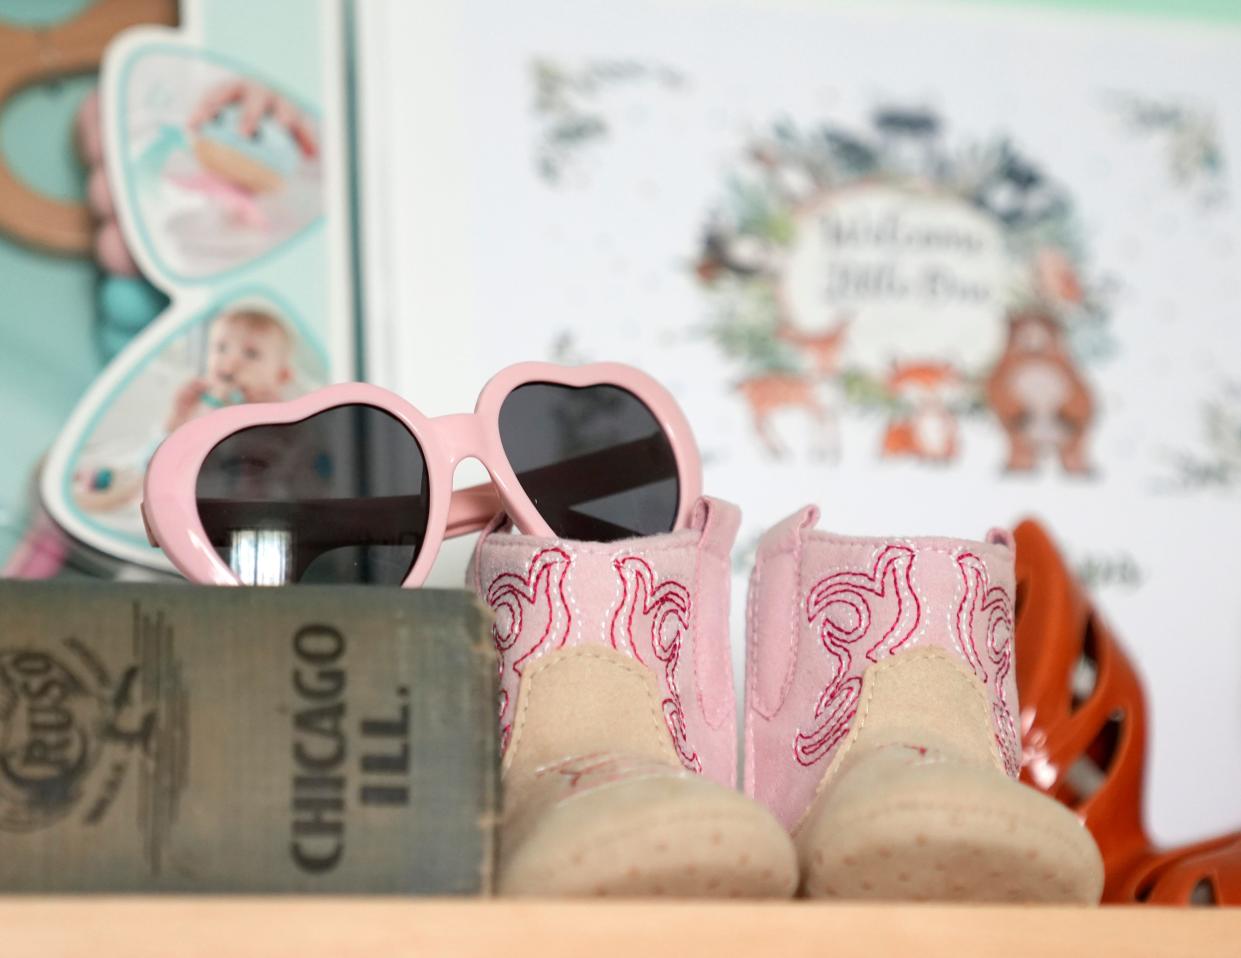 Tiny pink sunglasses and boots are seen Tuesday on a shelf in the nursery intended for Elleanor Hayes, who was three weeks away from being born when her mother, Nellie Hayes, died from a pulmonary embolism caused by a placental abruption at the end of March.